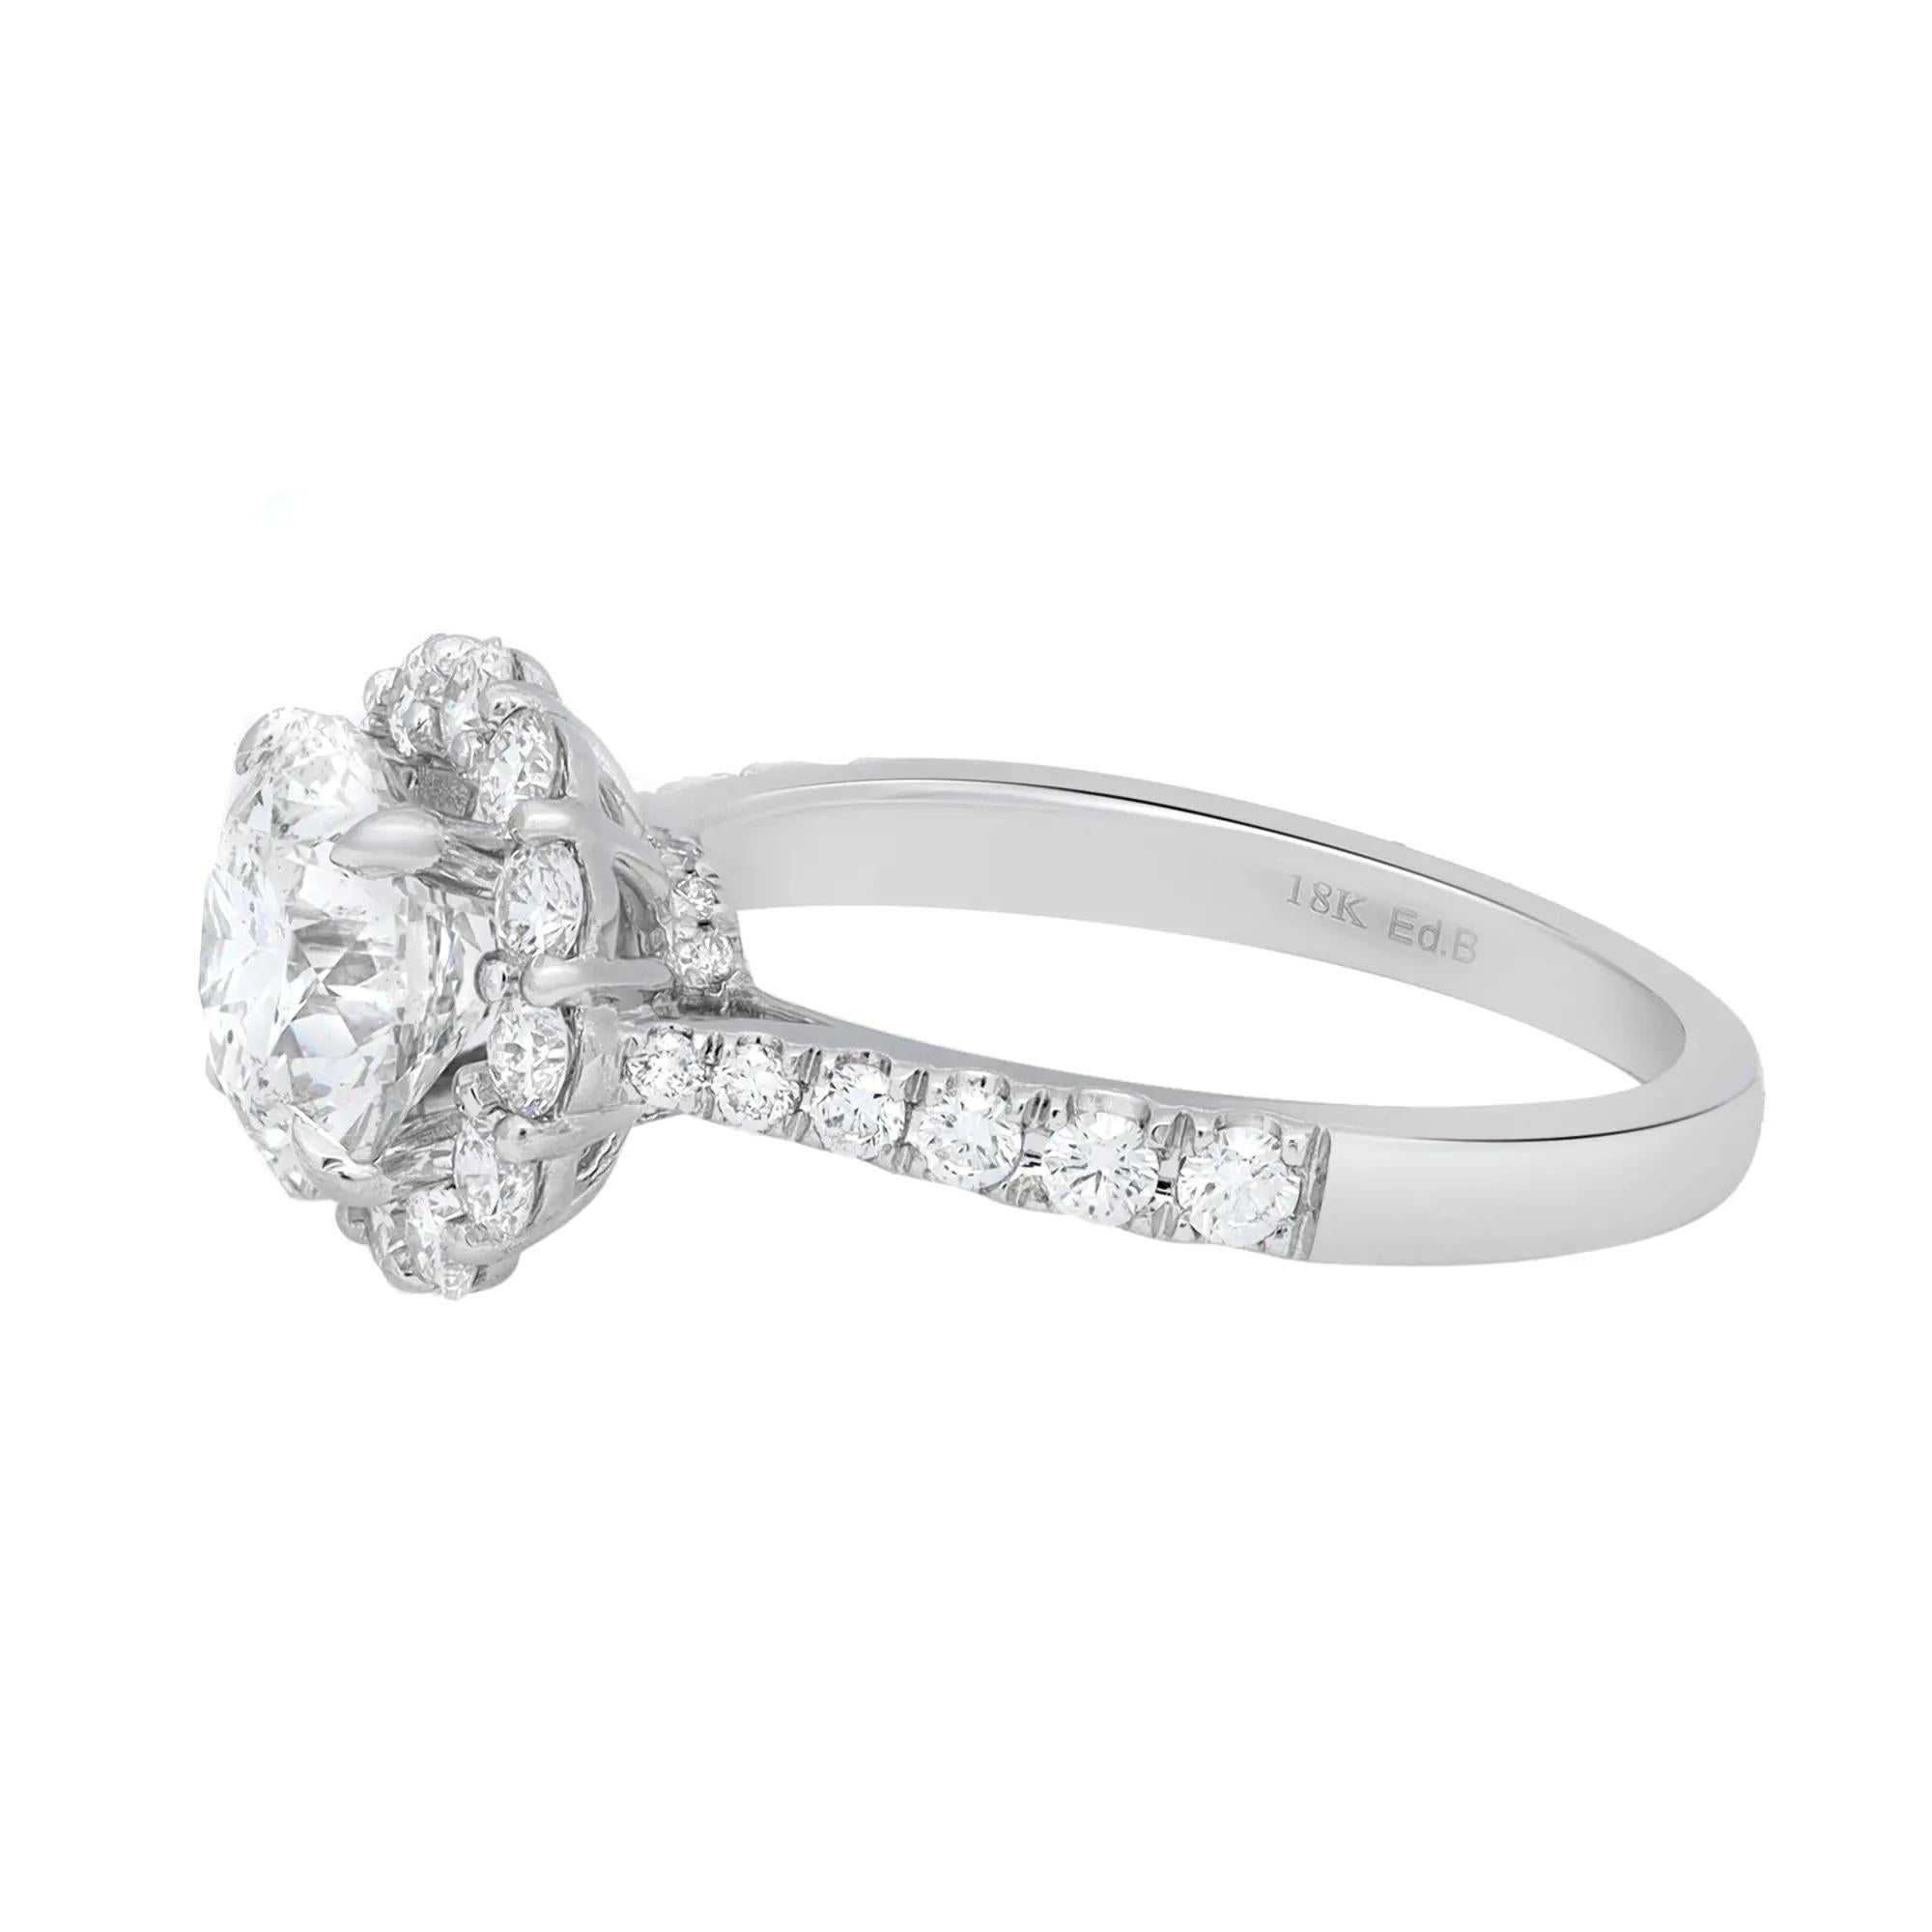 This enchanting ring is adorned with a sparkling GIA certified round brilliant cut diamond in the center, secured firmly in a beautiful four prong setting and a classic round cut diamond shank that lends the final touch to the design aesthetic. The